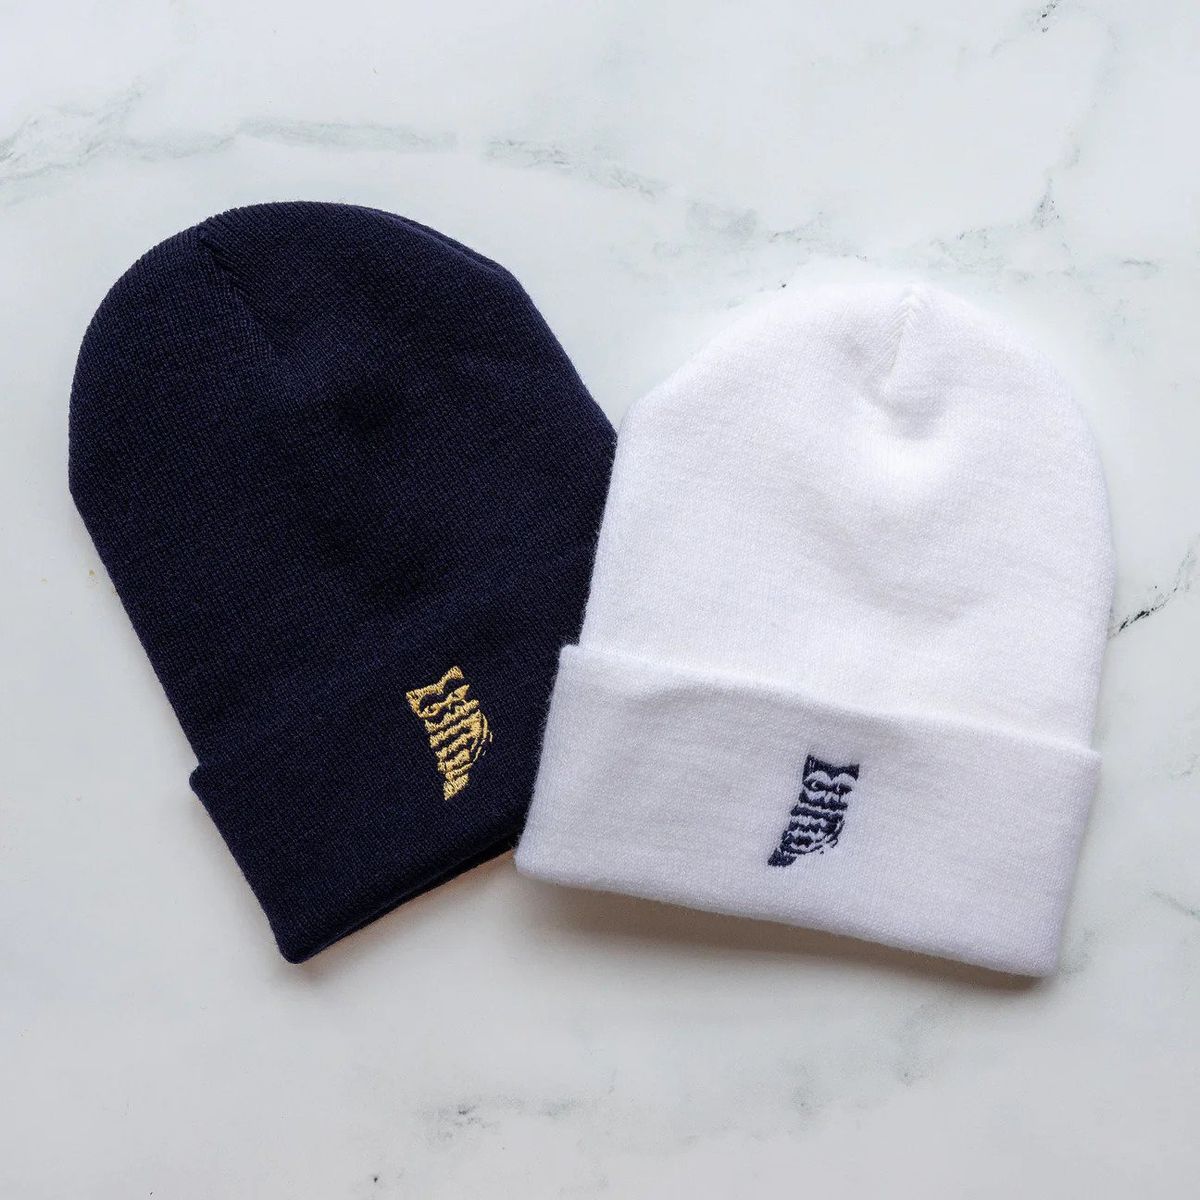 Two knit beanies, one navy, one white, both with an embroidered owl logo